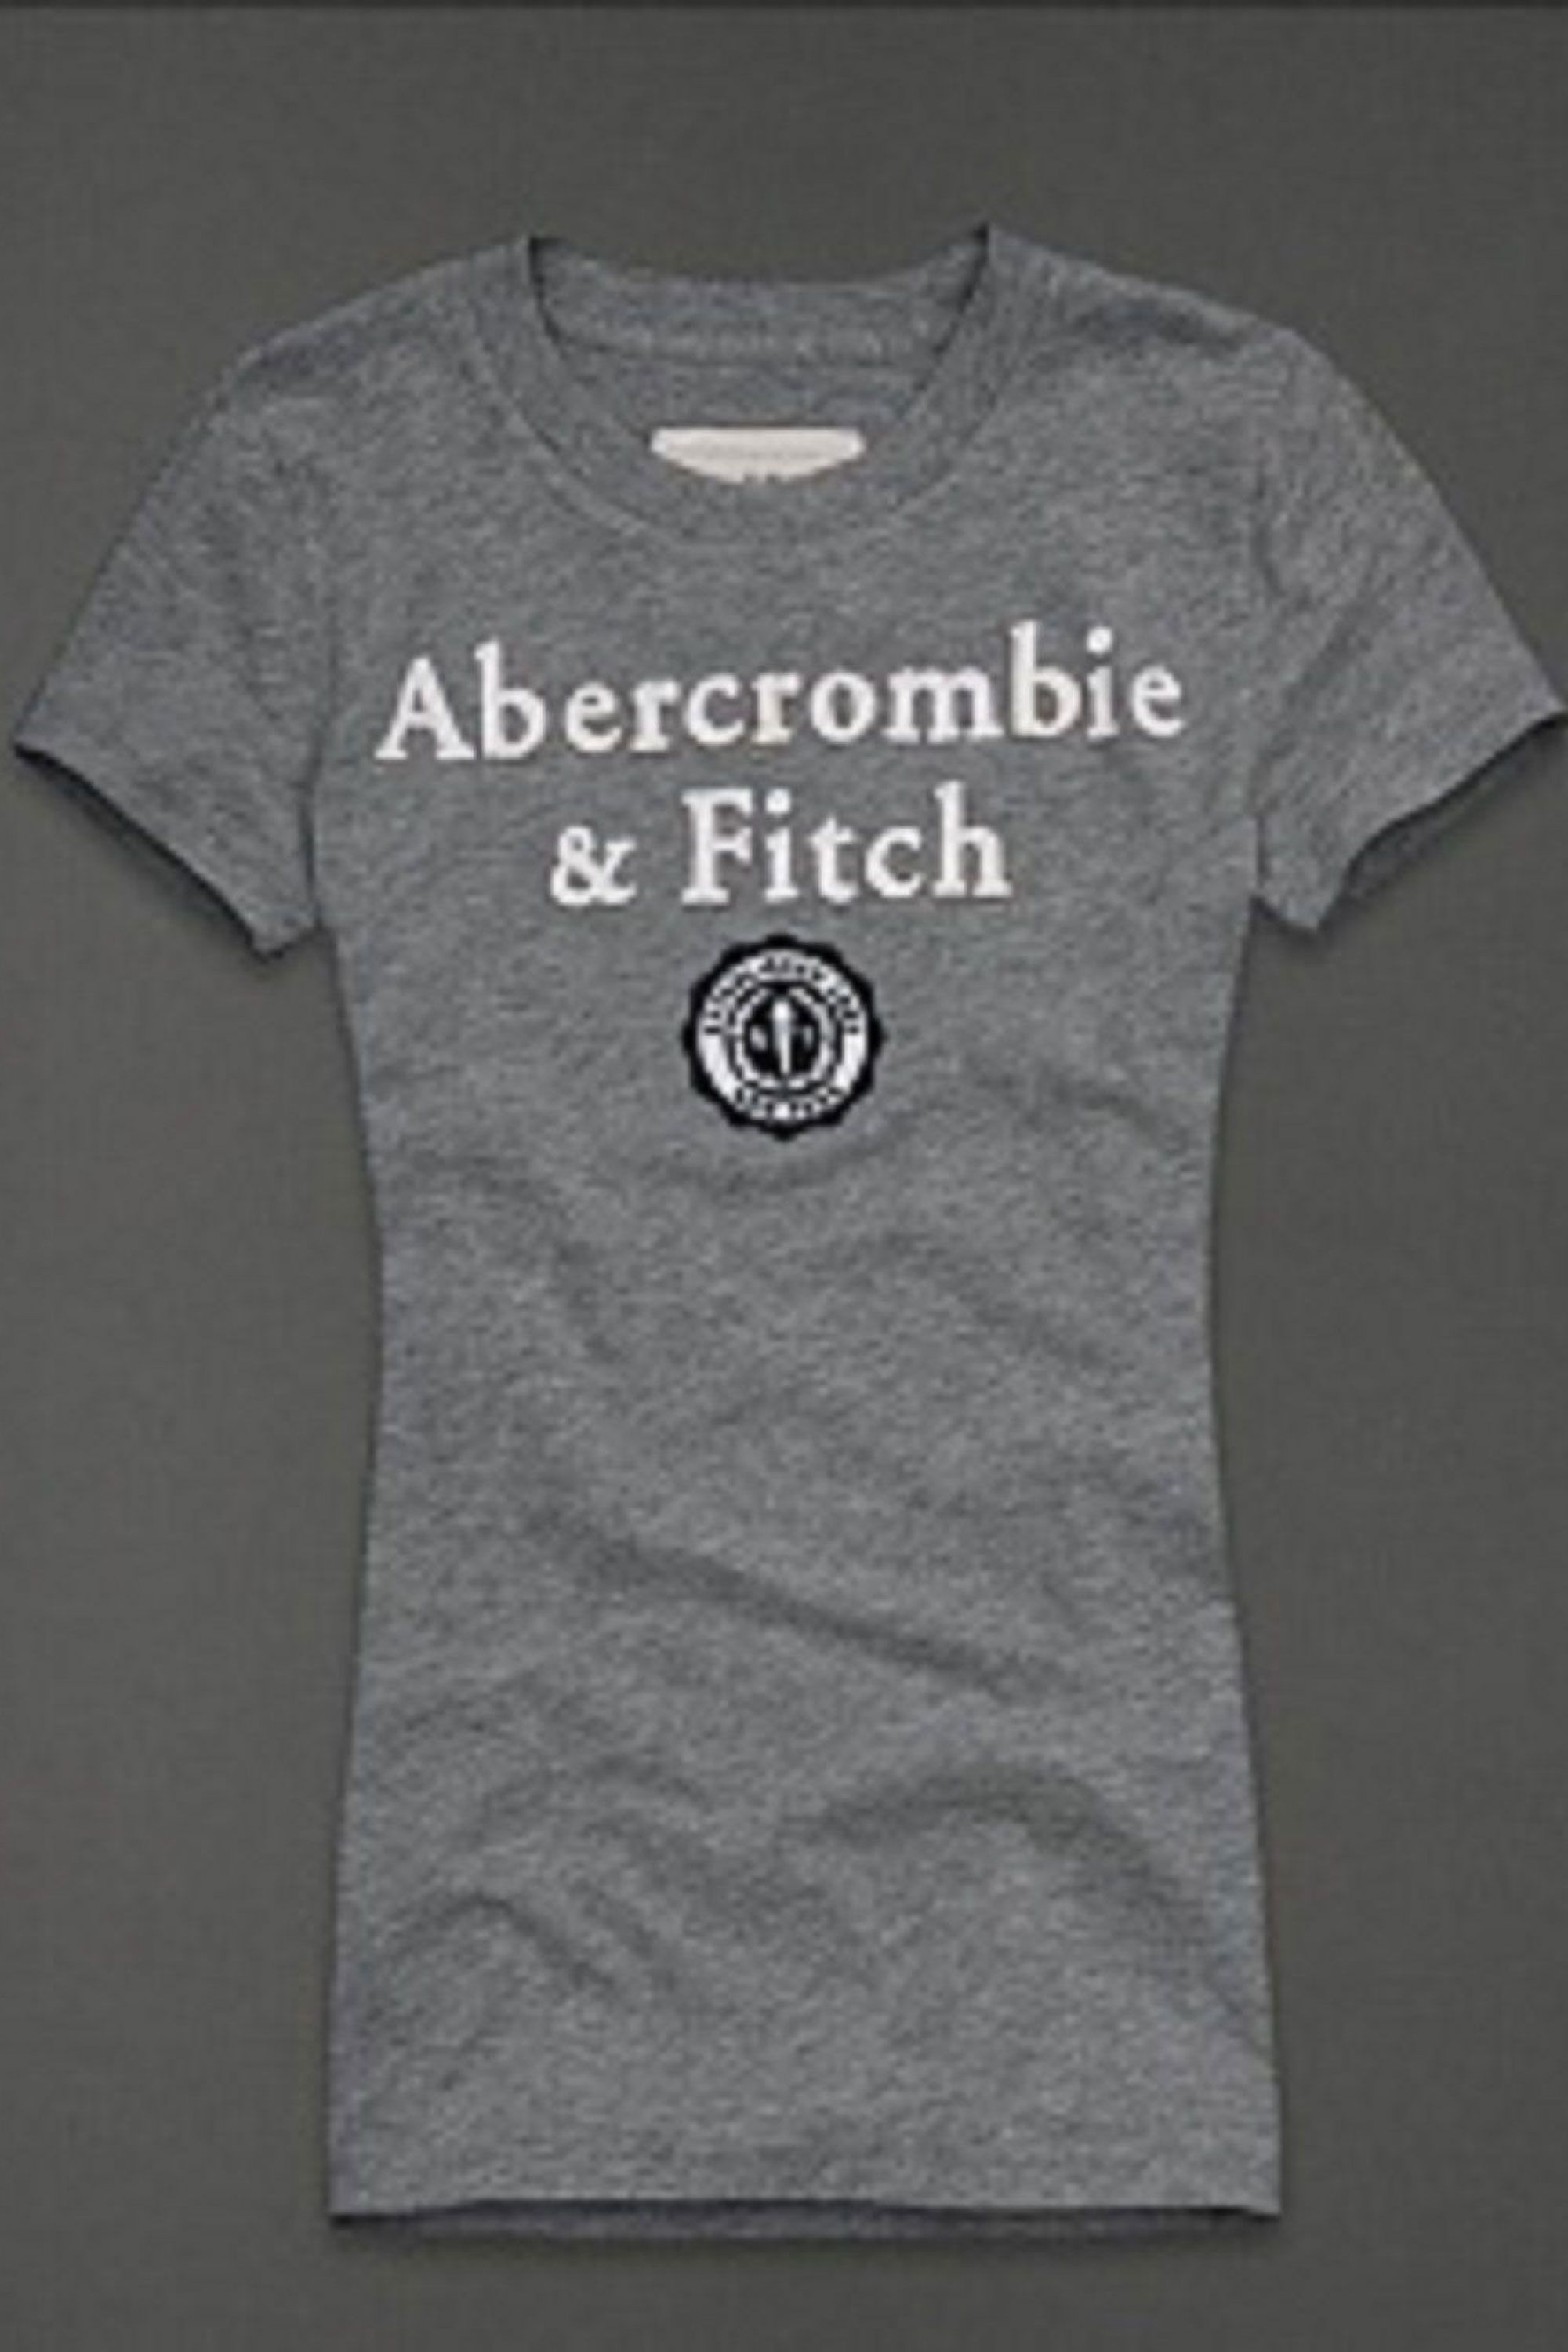 abercrombie & fitch shirts